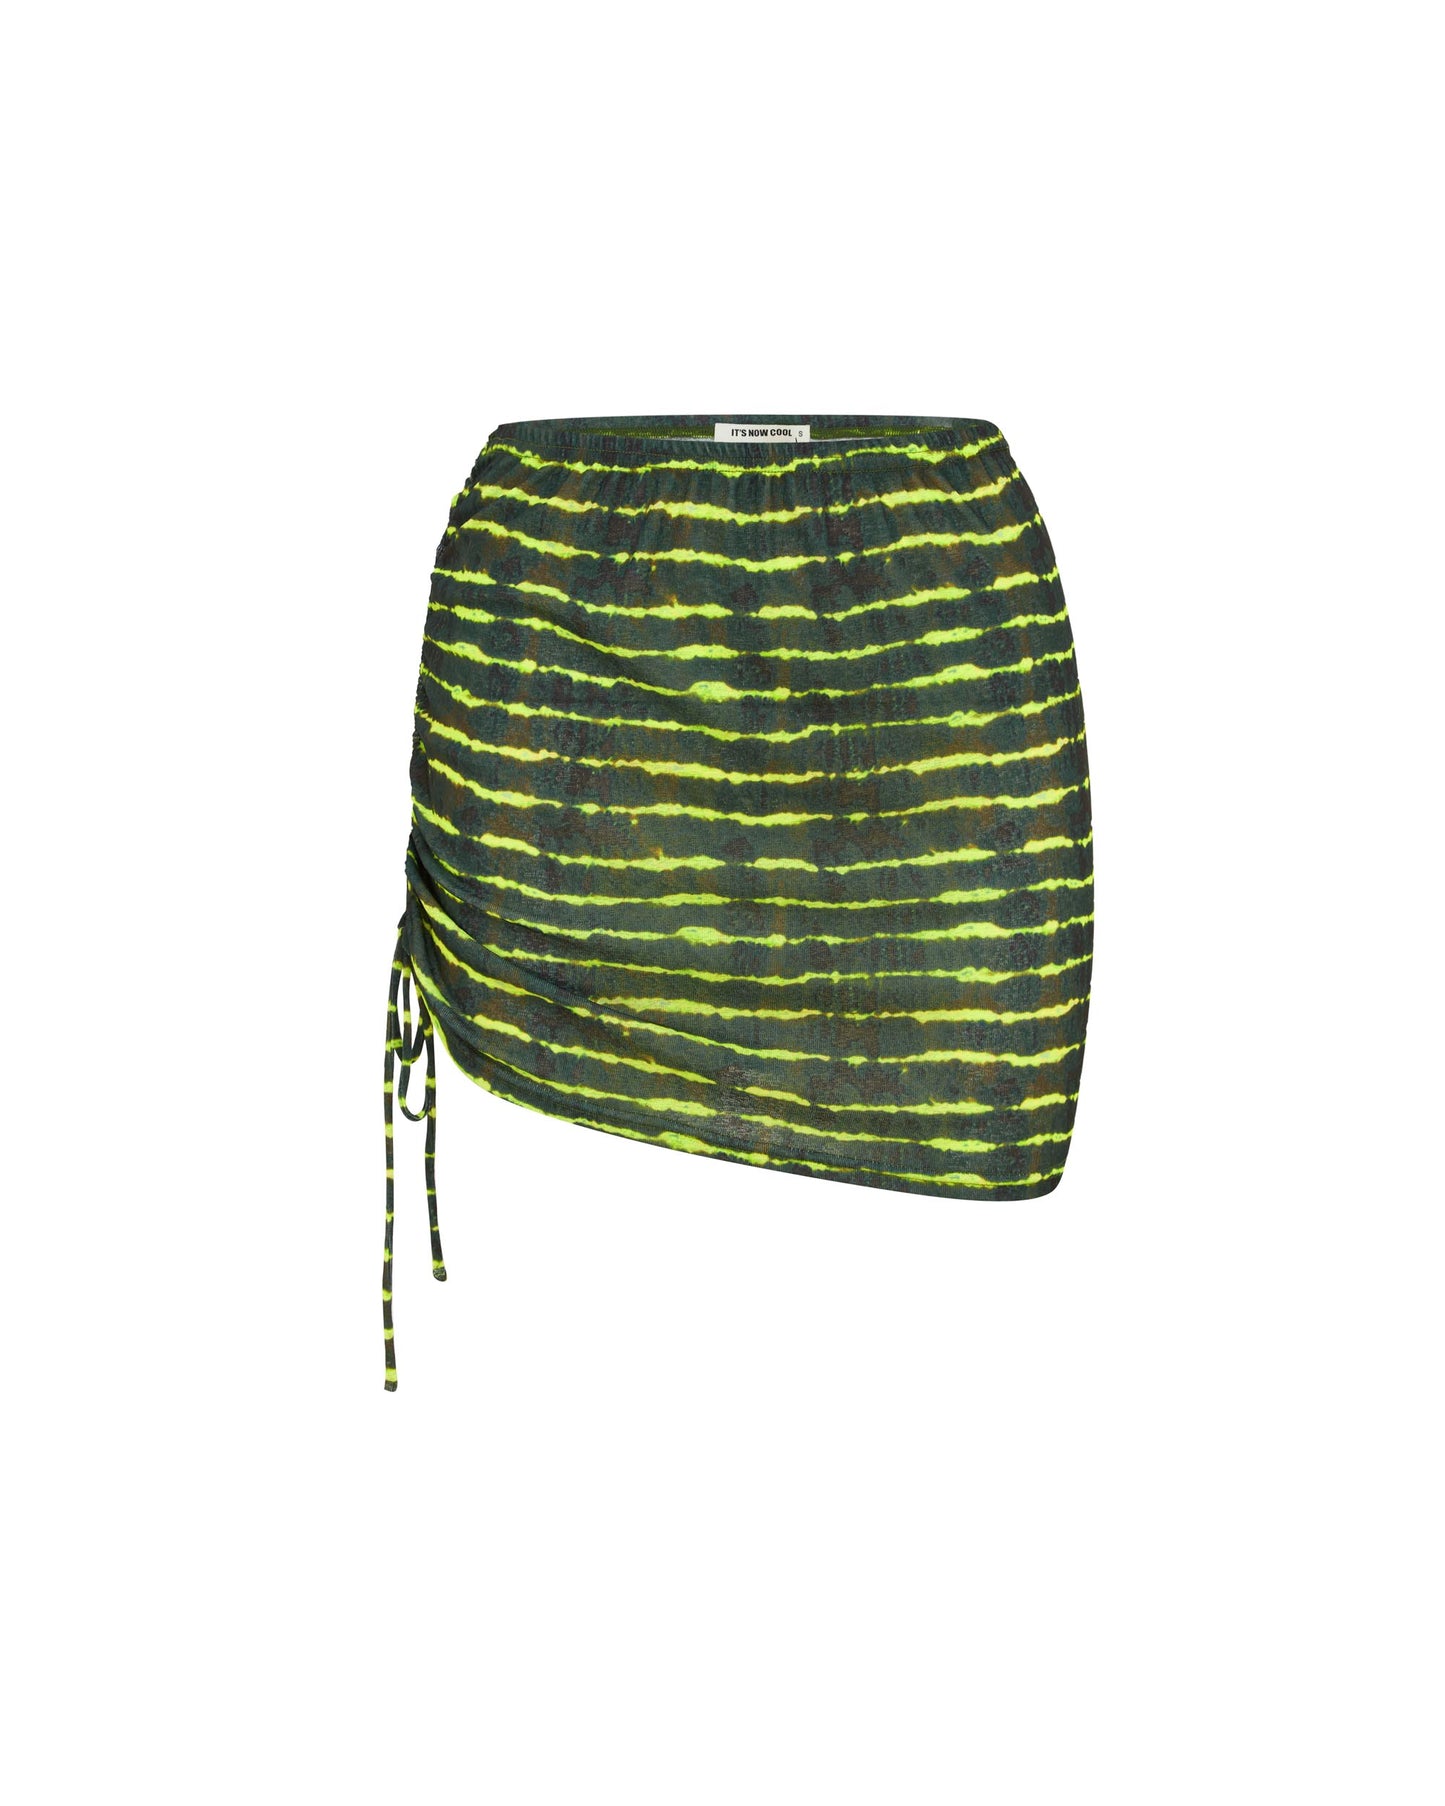 THE ROUCH SKIRT - COCOMOCO